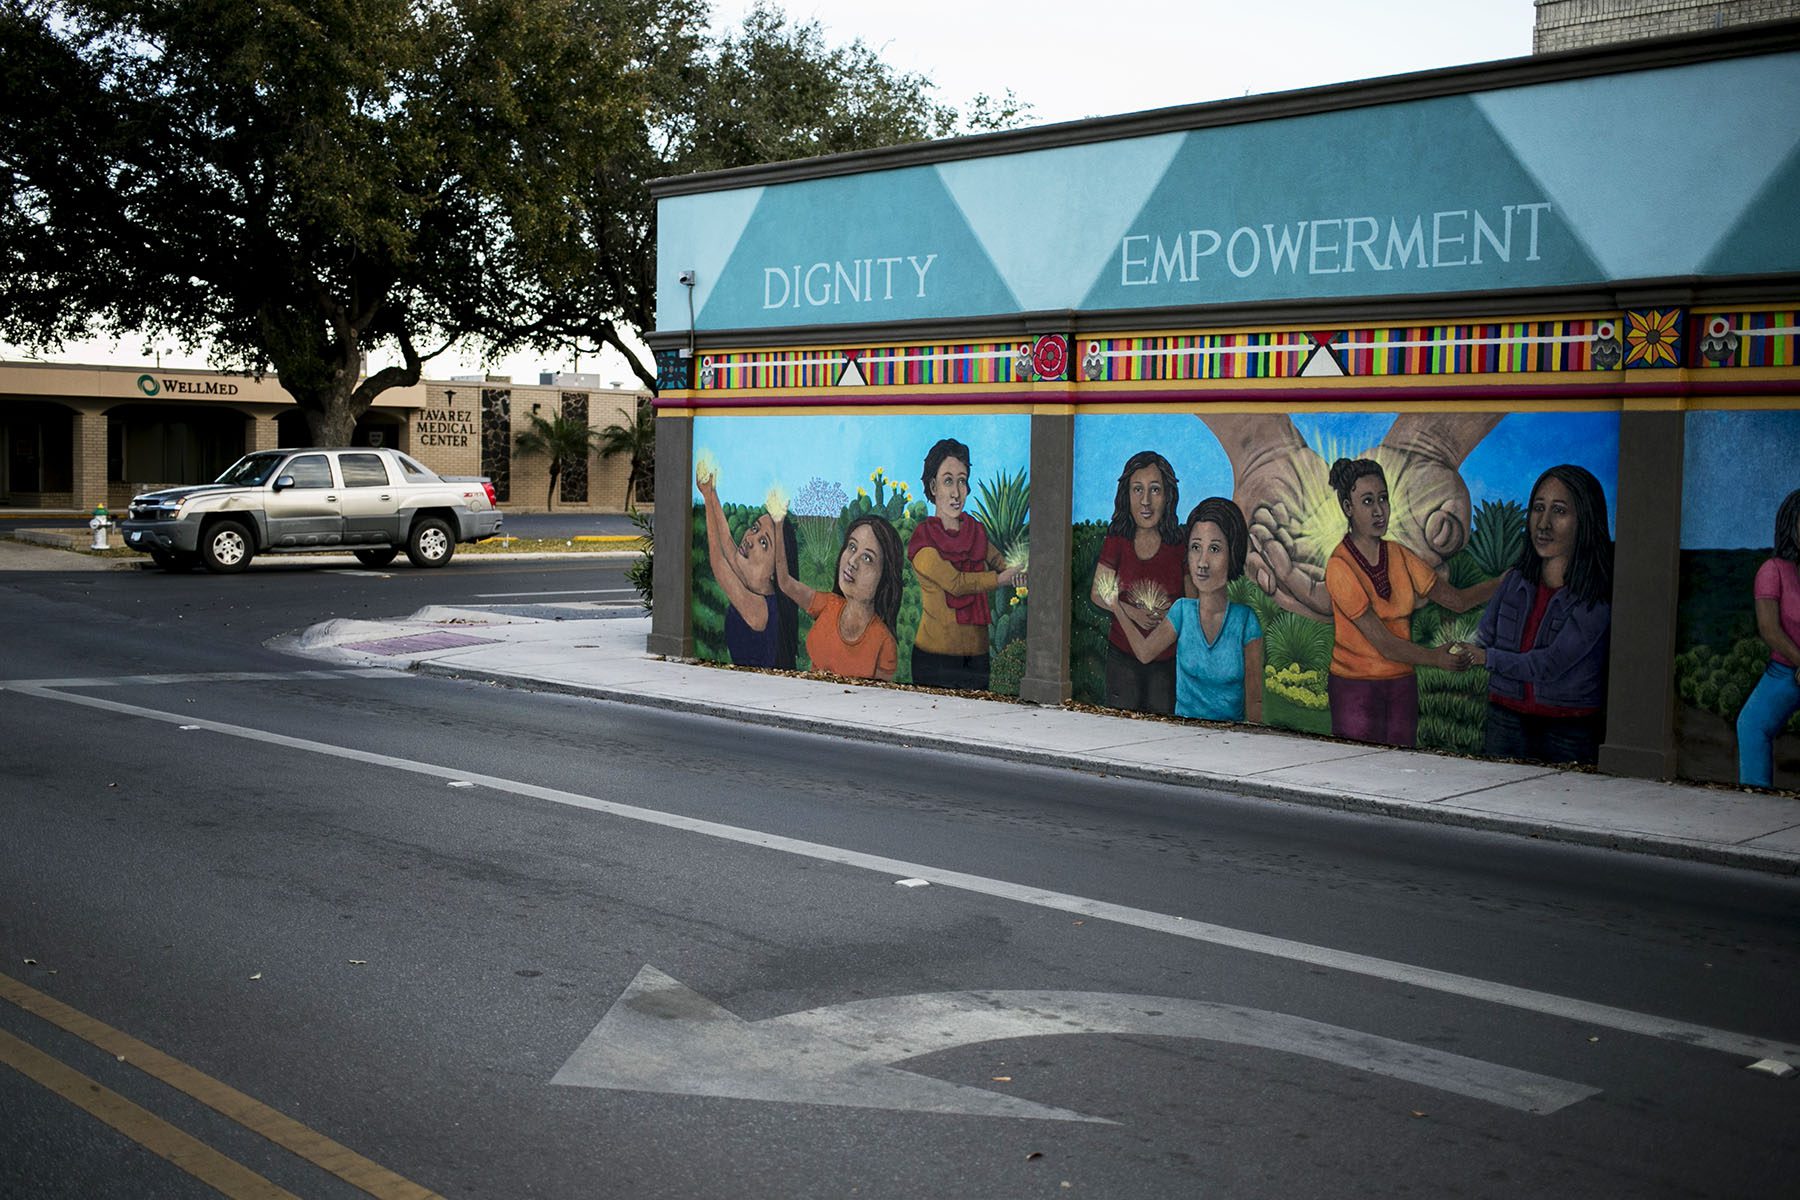 A mural painted on the side of the clinic has the words 'dignity,' 'empowerment,' 'compassion,' and 'justice' accompanying a painted scene where women hold hands and comfort each other.